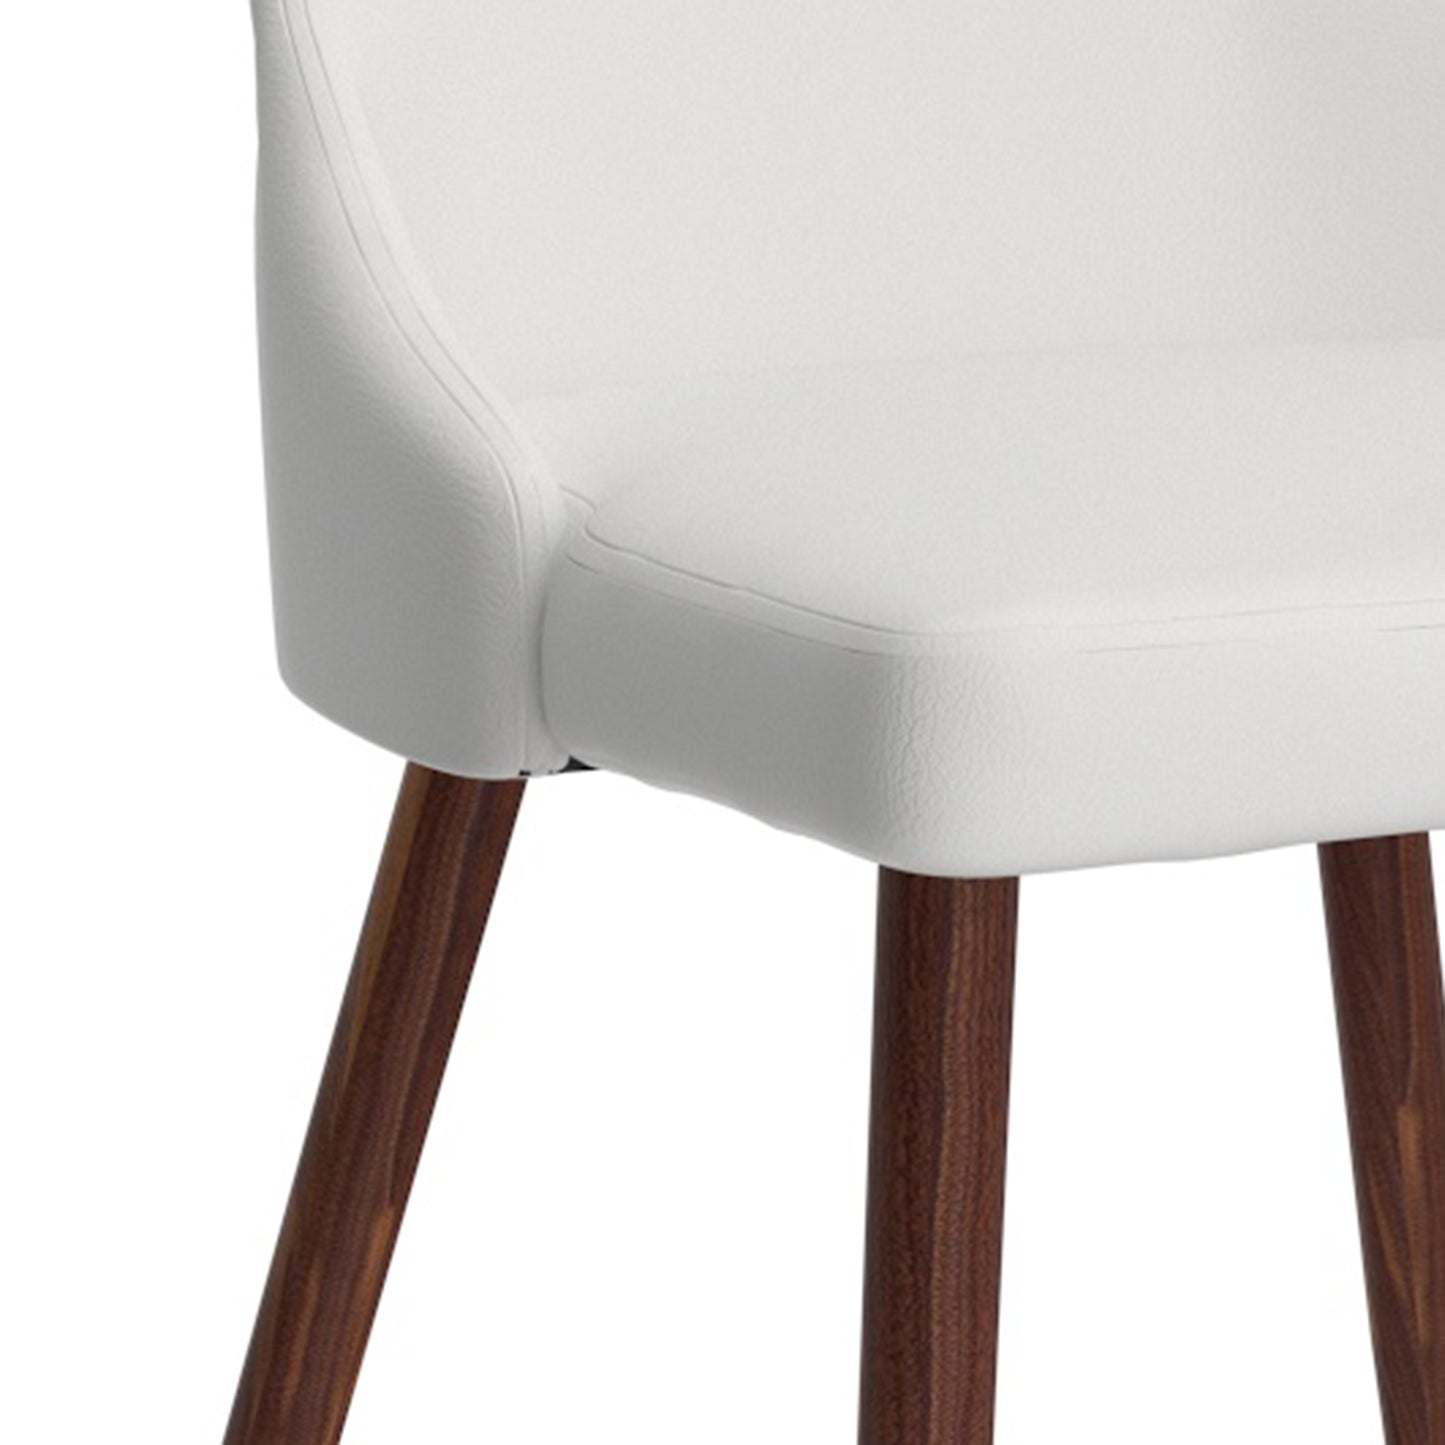 Cora Faux Leather Side Chair, Set of 2 in White and Walnut